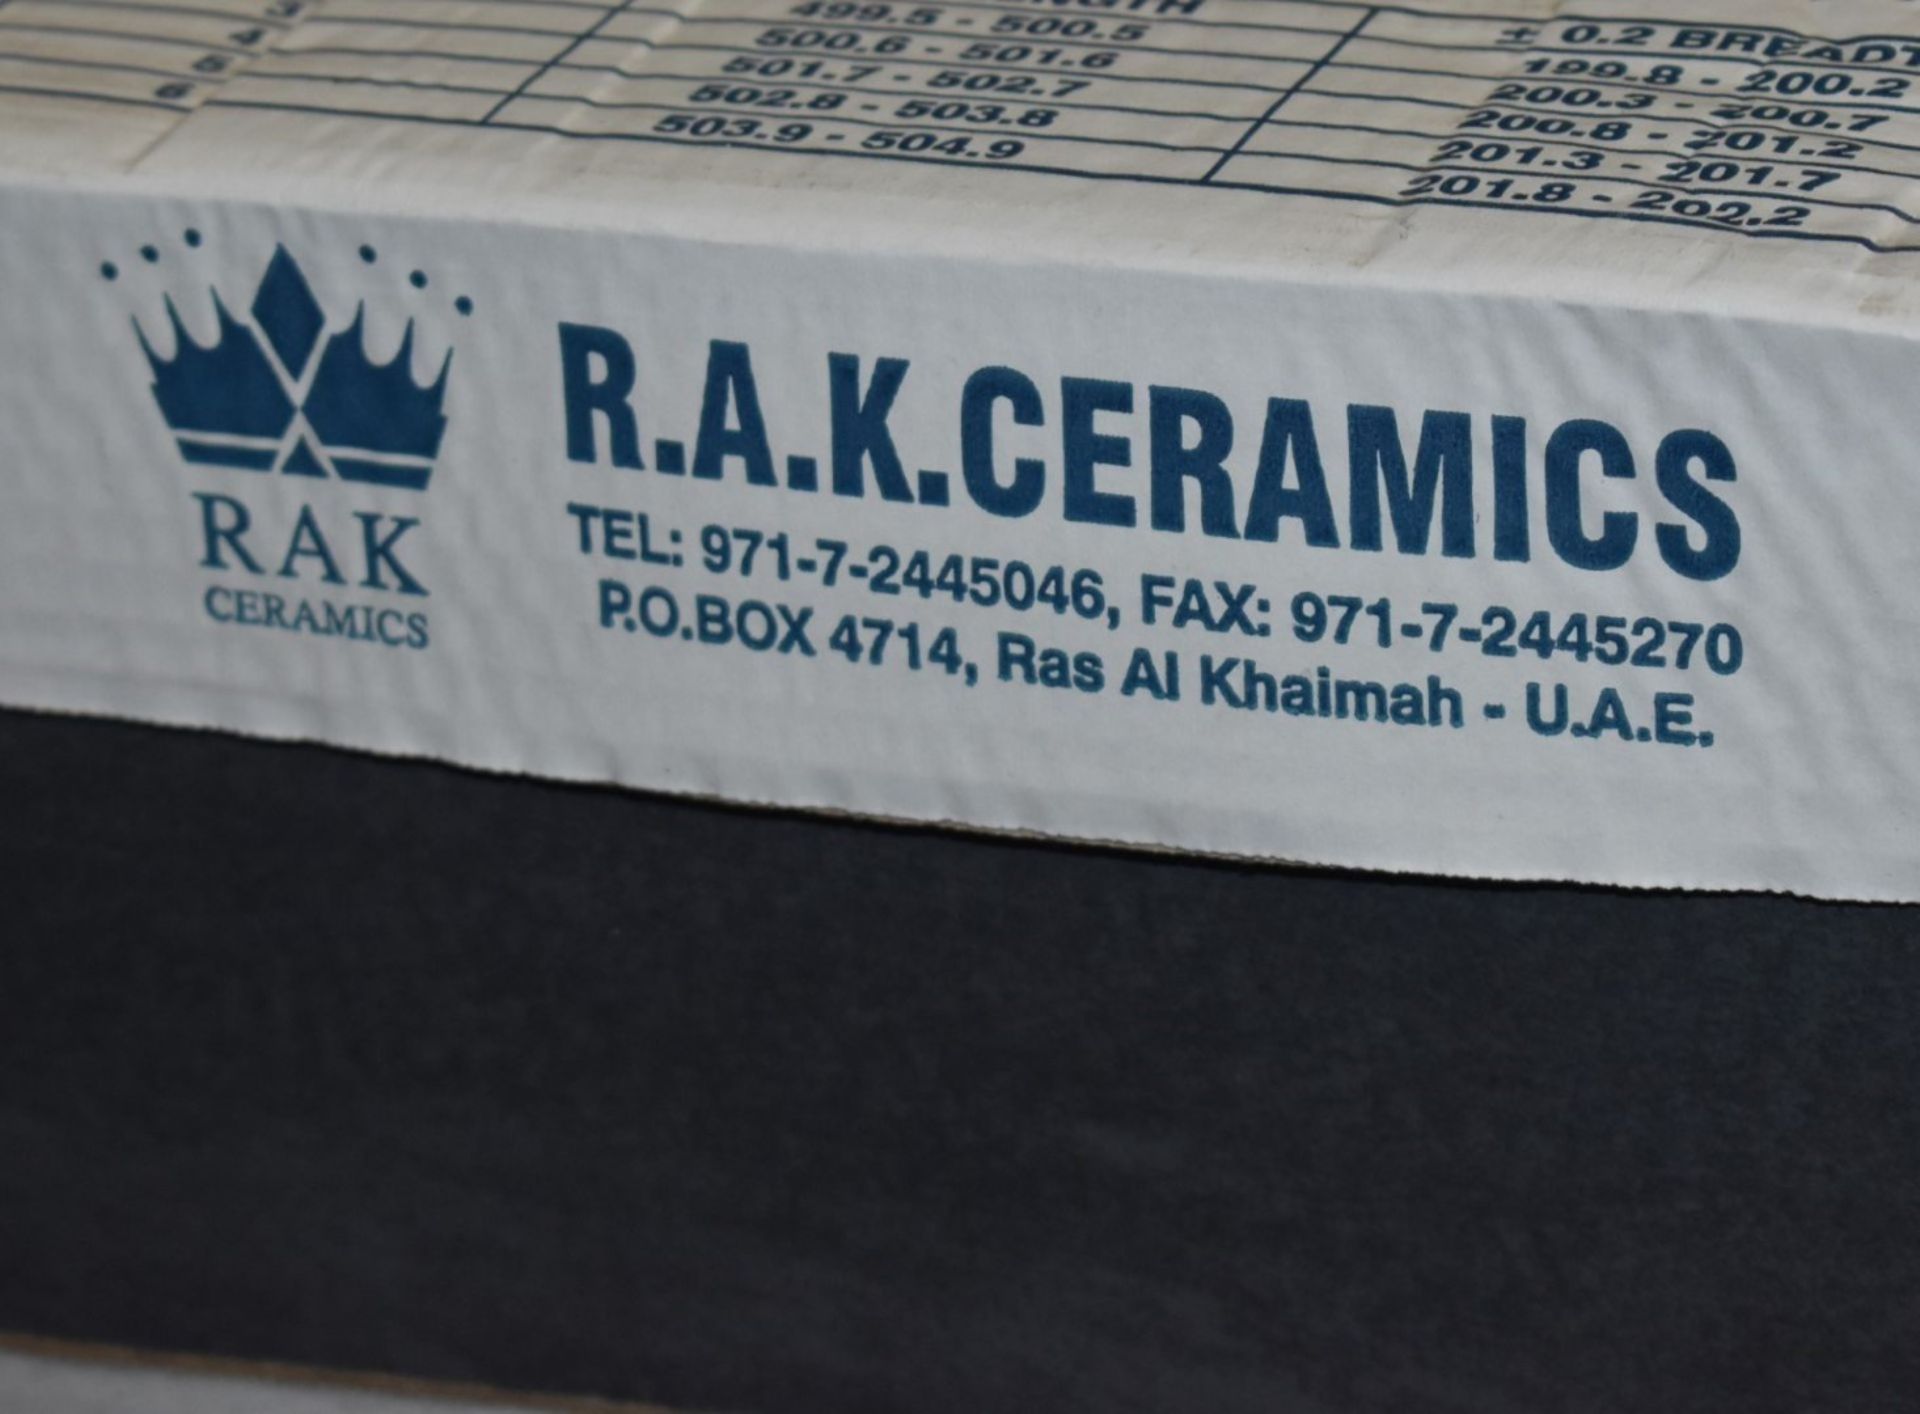 18 x Boxes of RAK Porcelain Floor or Wall Tiles - Dolomite Black - 20 x 50 cm Tiles Covering a Total - Image 4 of 9